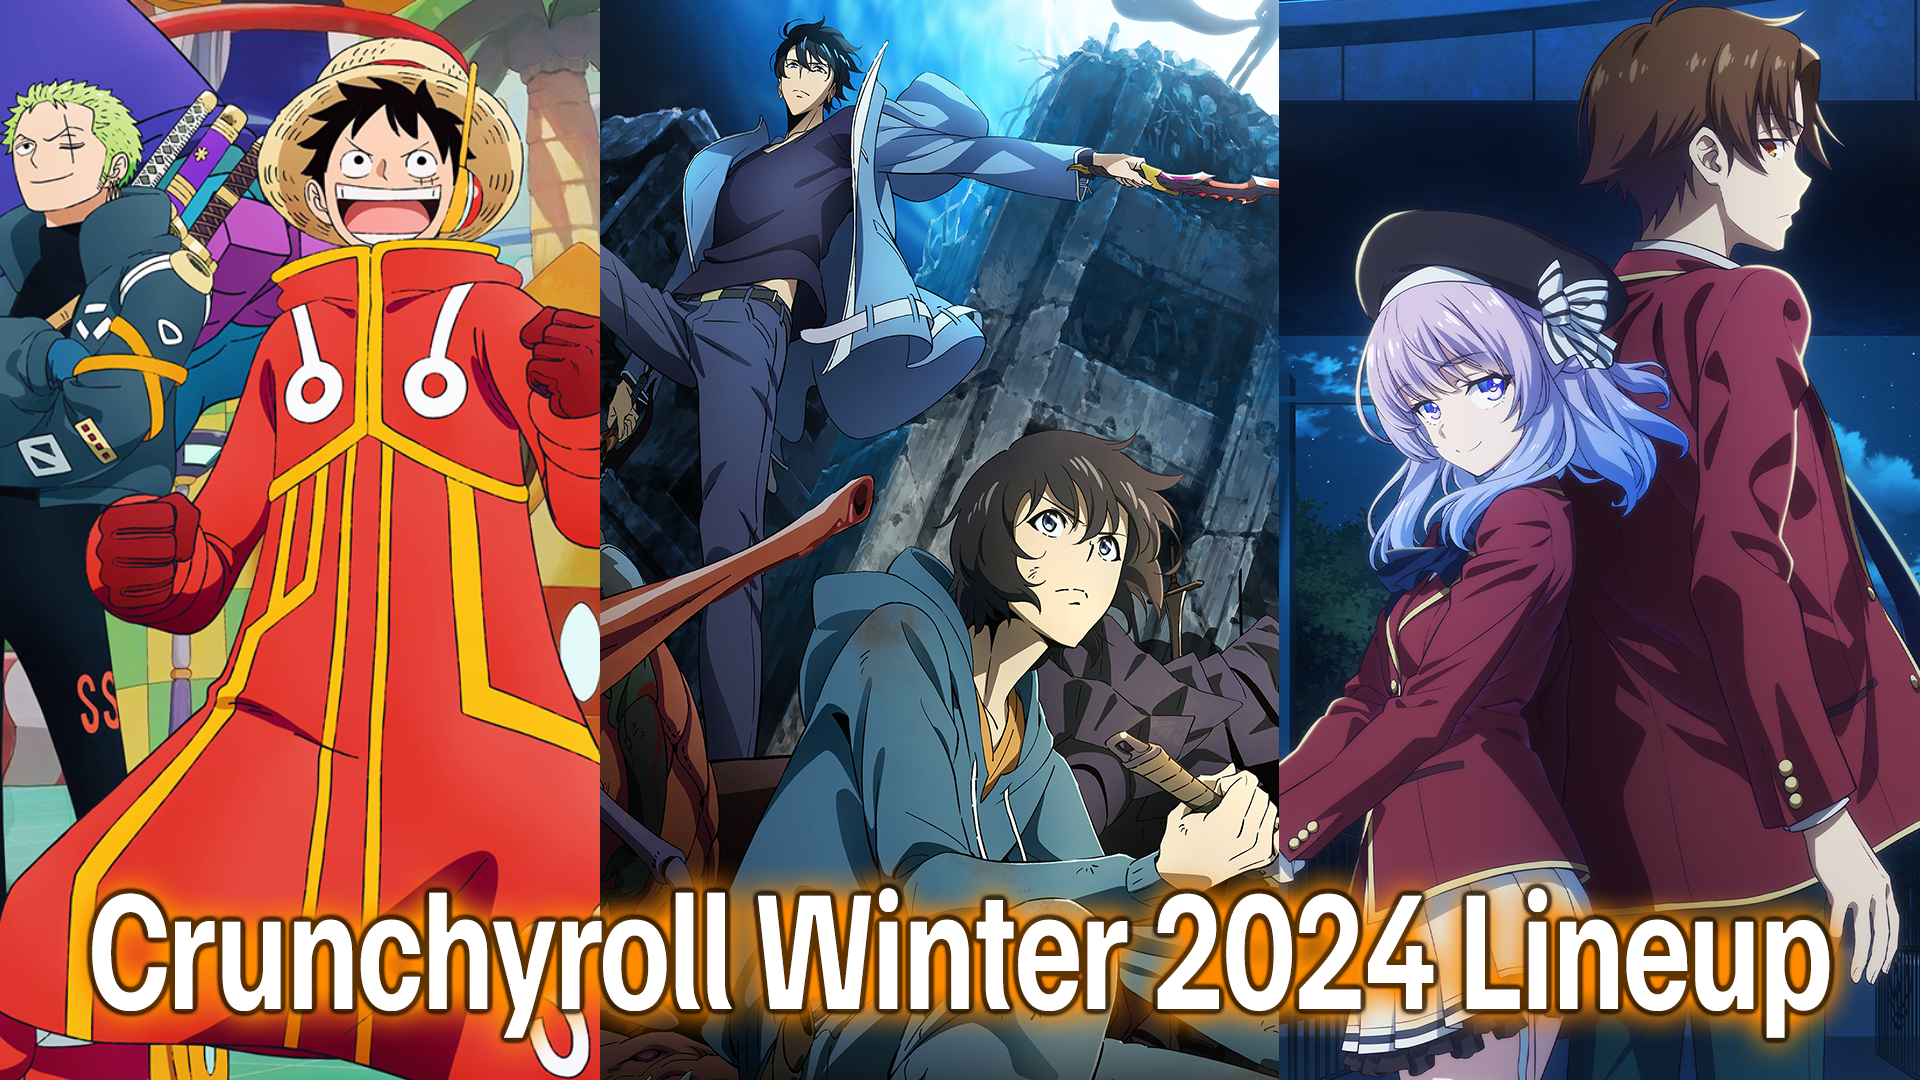 Crunchyroll Announces More New 2023 Anime Series at Anime Frontier